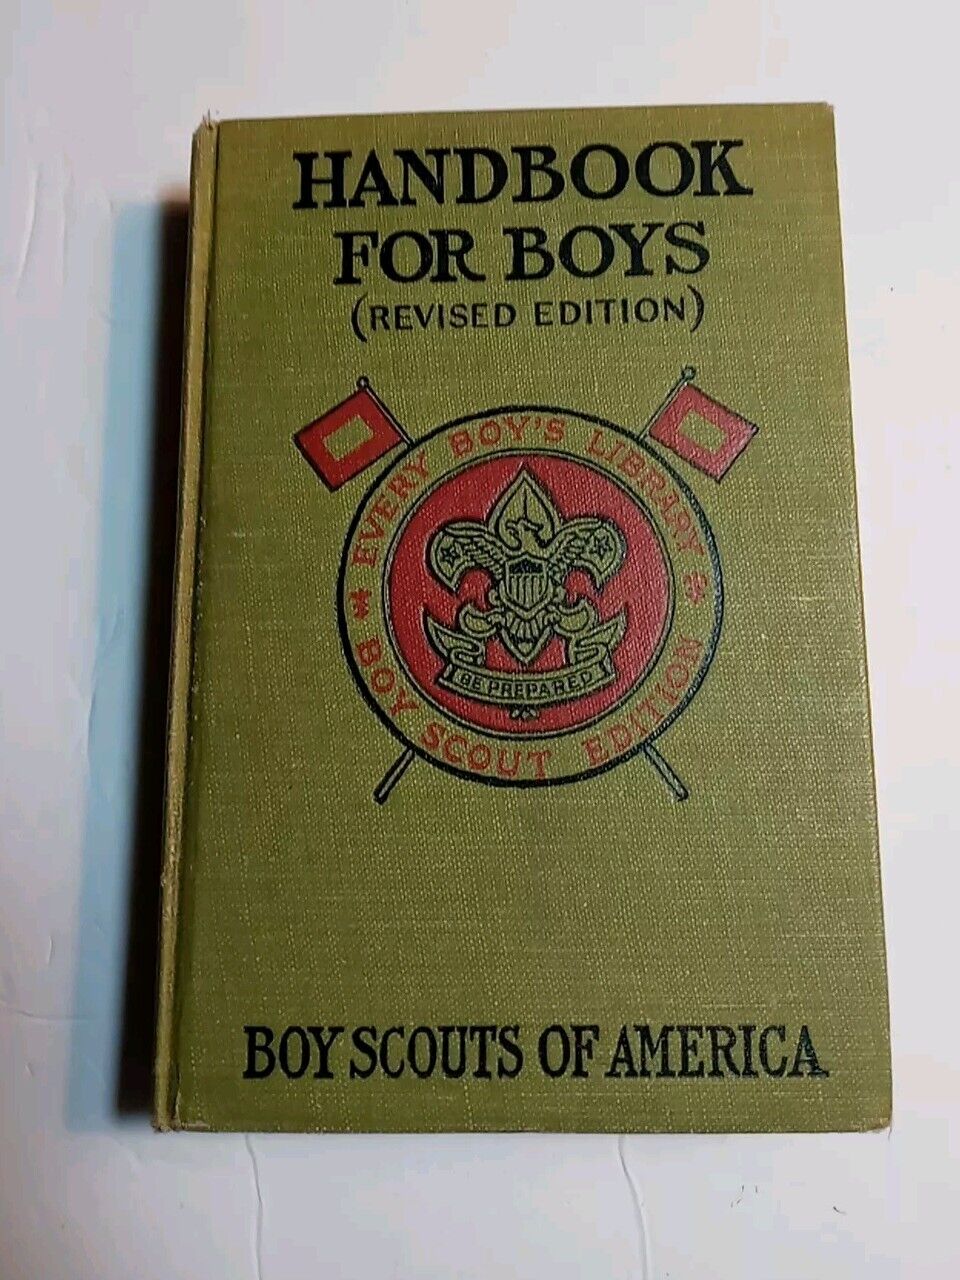 Handbook for Boys (Revised) 1913 21st 1921 Printing Boy Scouts of America (READ)